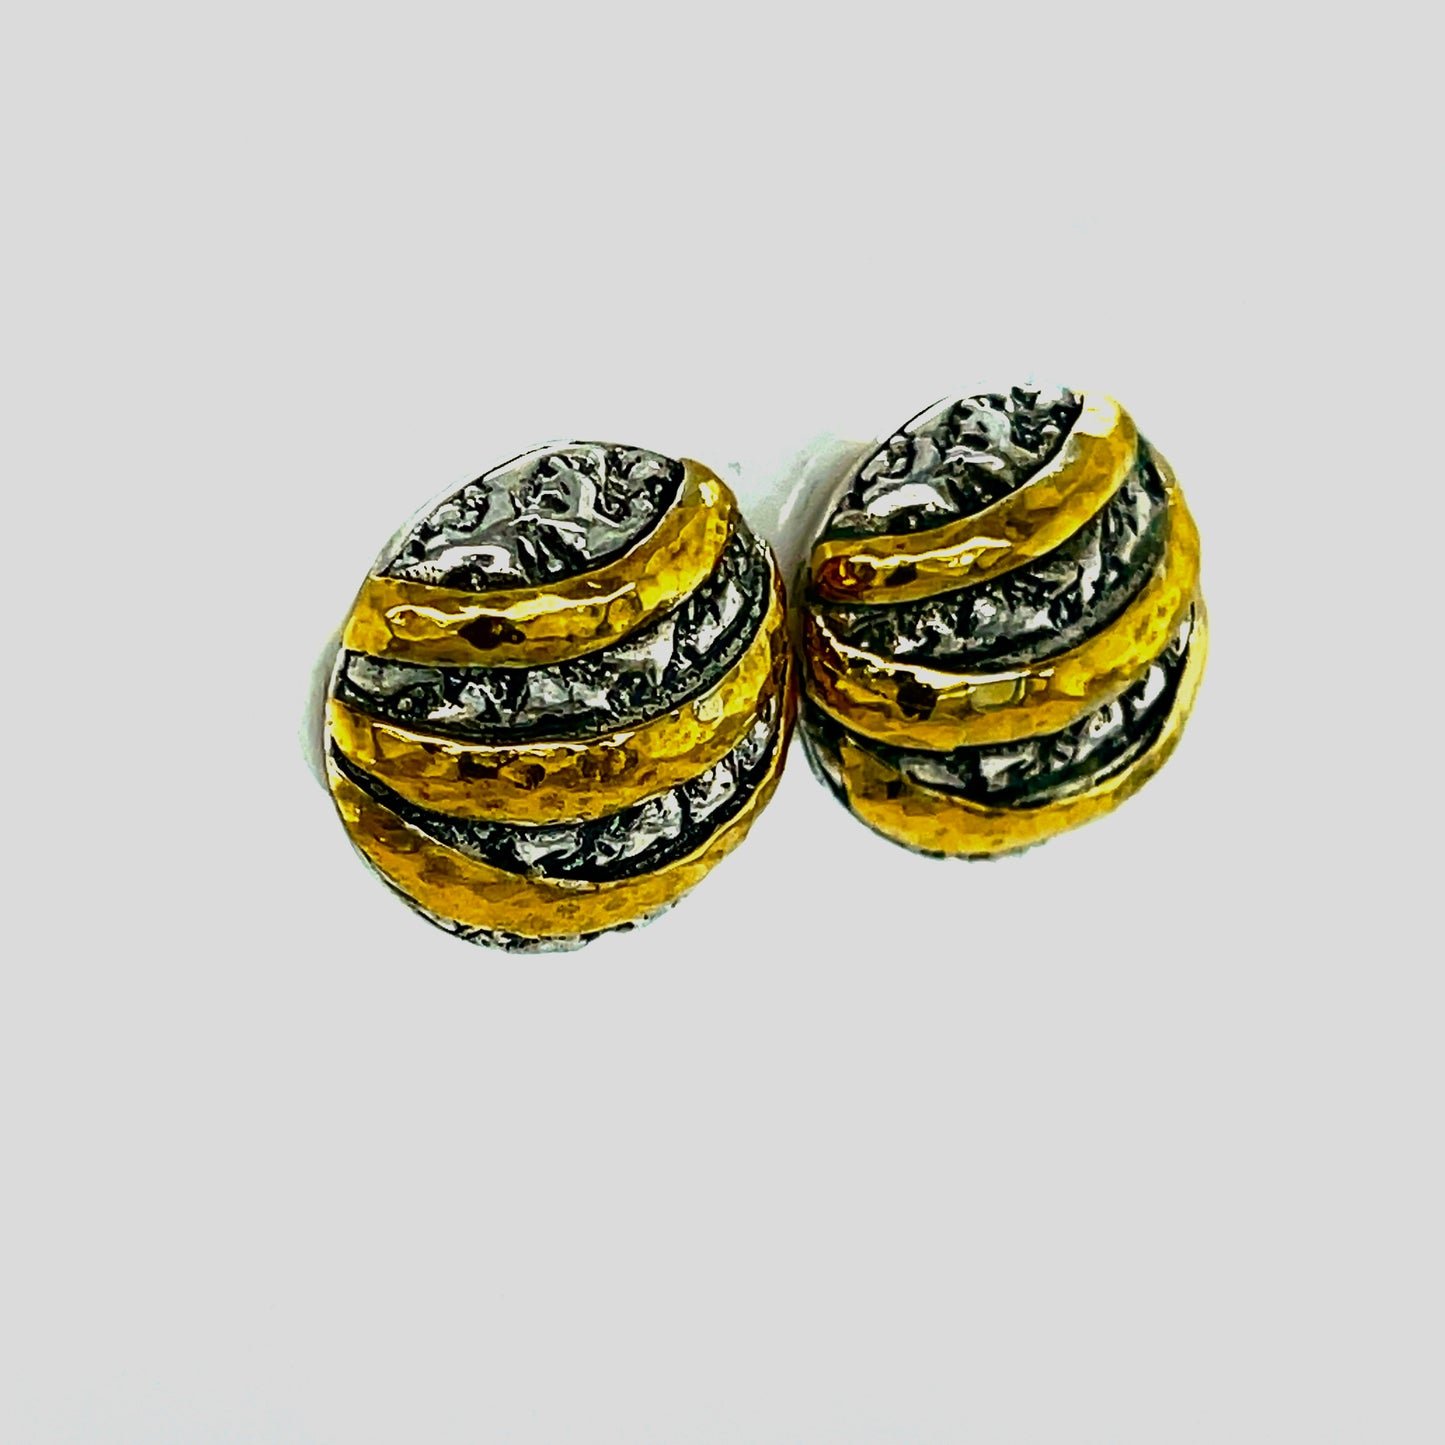 18kt Gold and Silver stud earrings